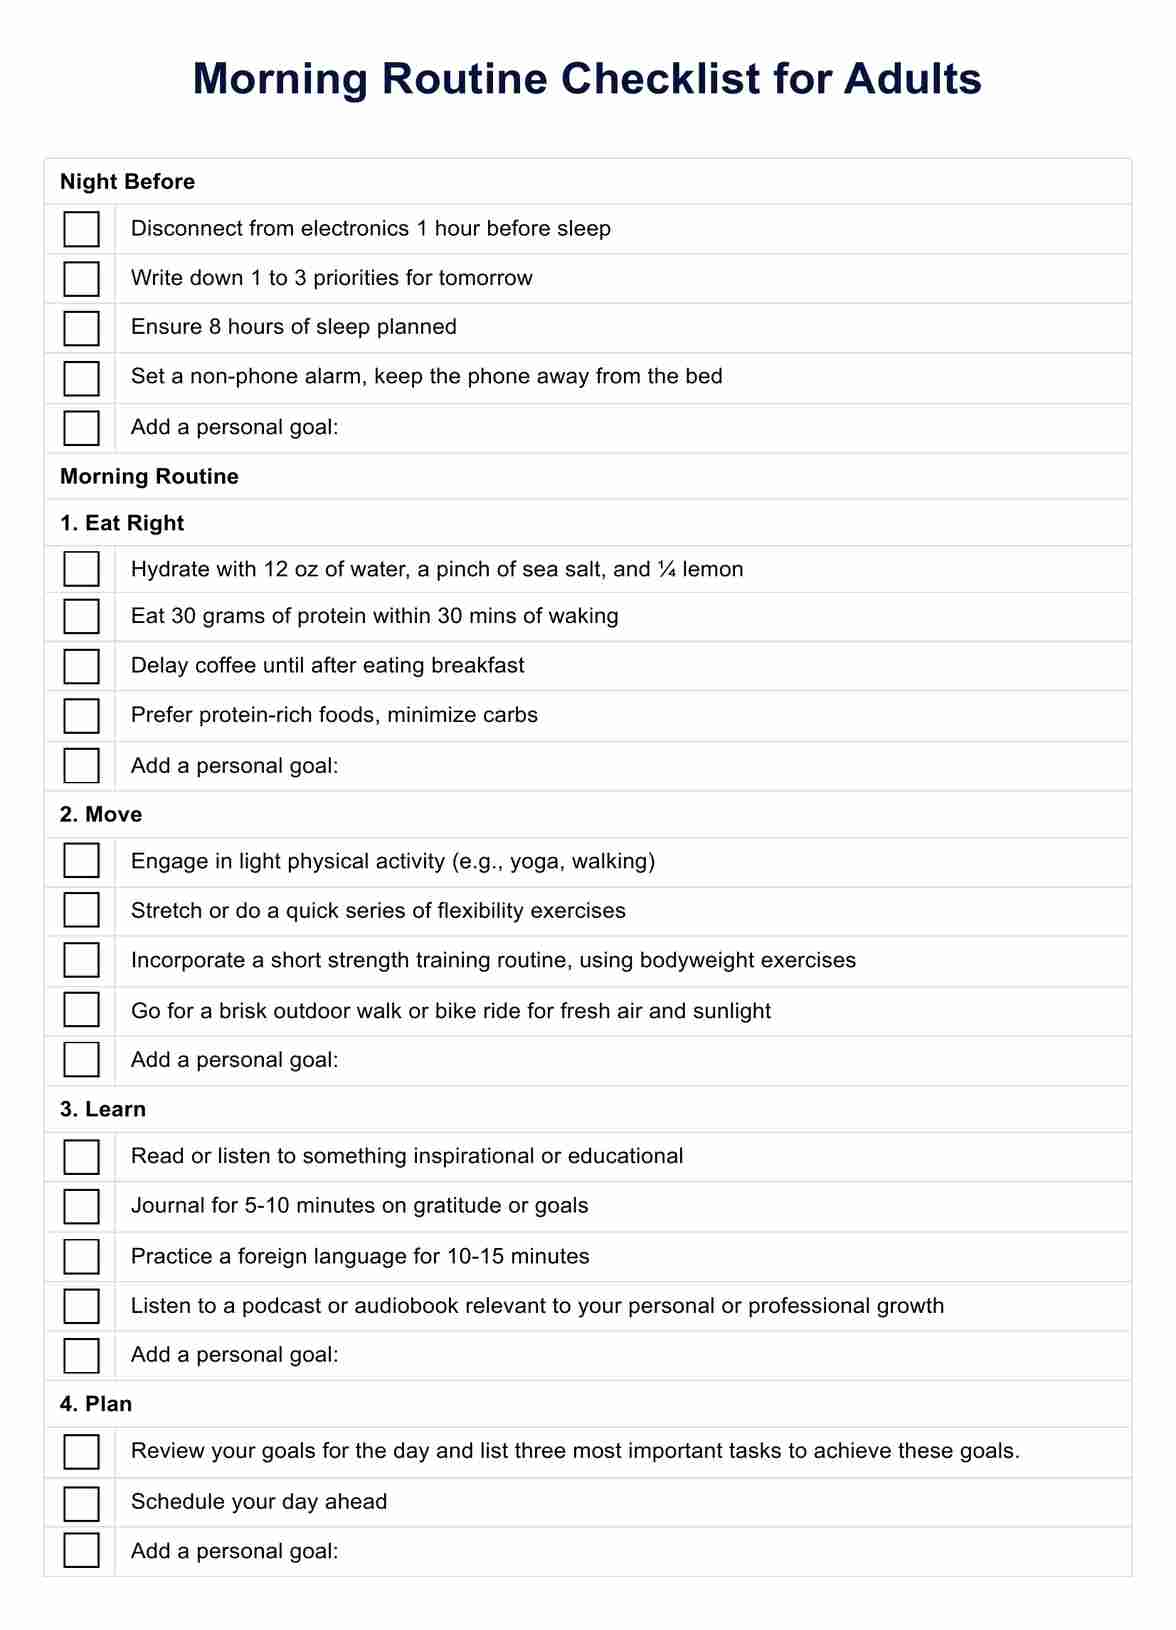 Morning Routine Checklist for Adults PDF PDF Example